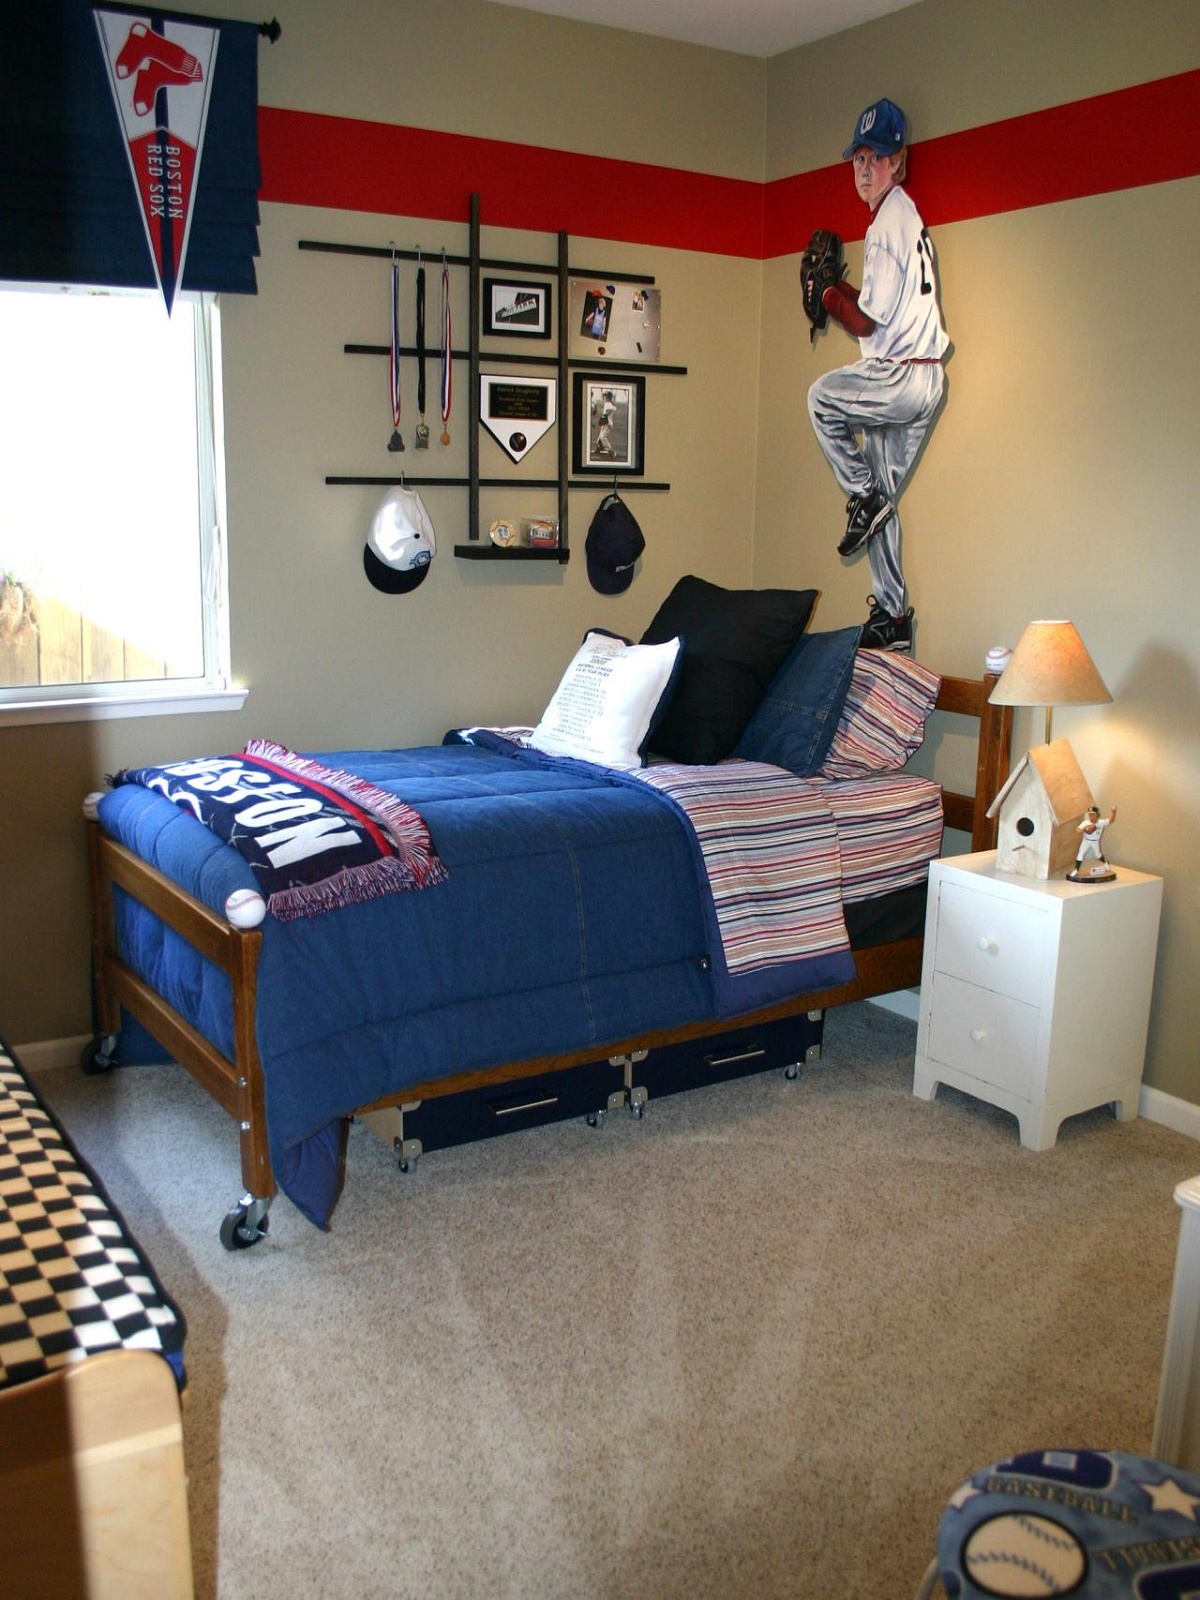 Unique Baseball Bedroom Ideas for Small Space